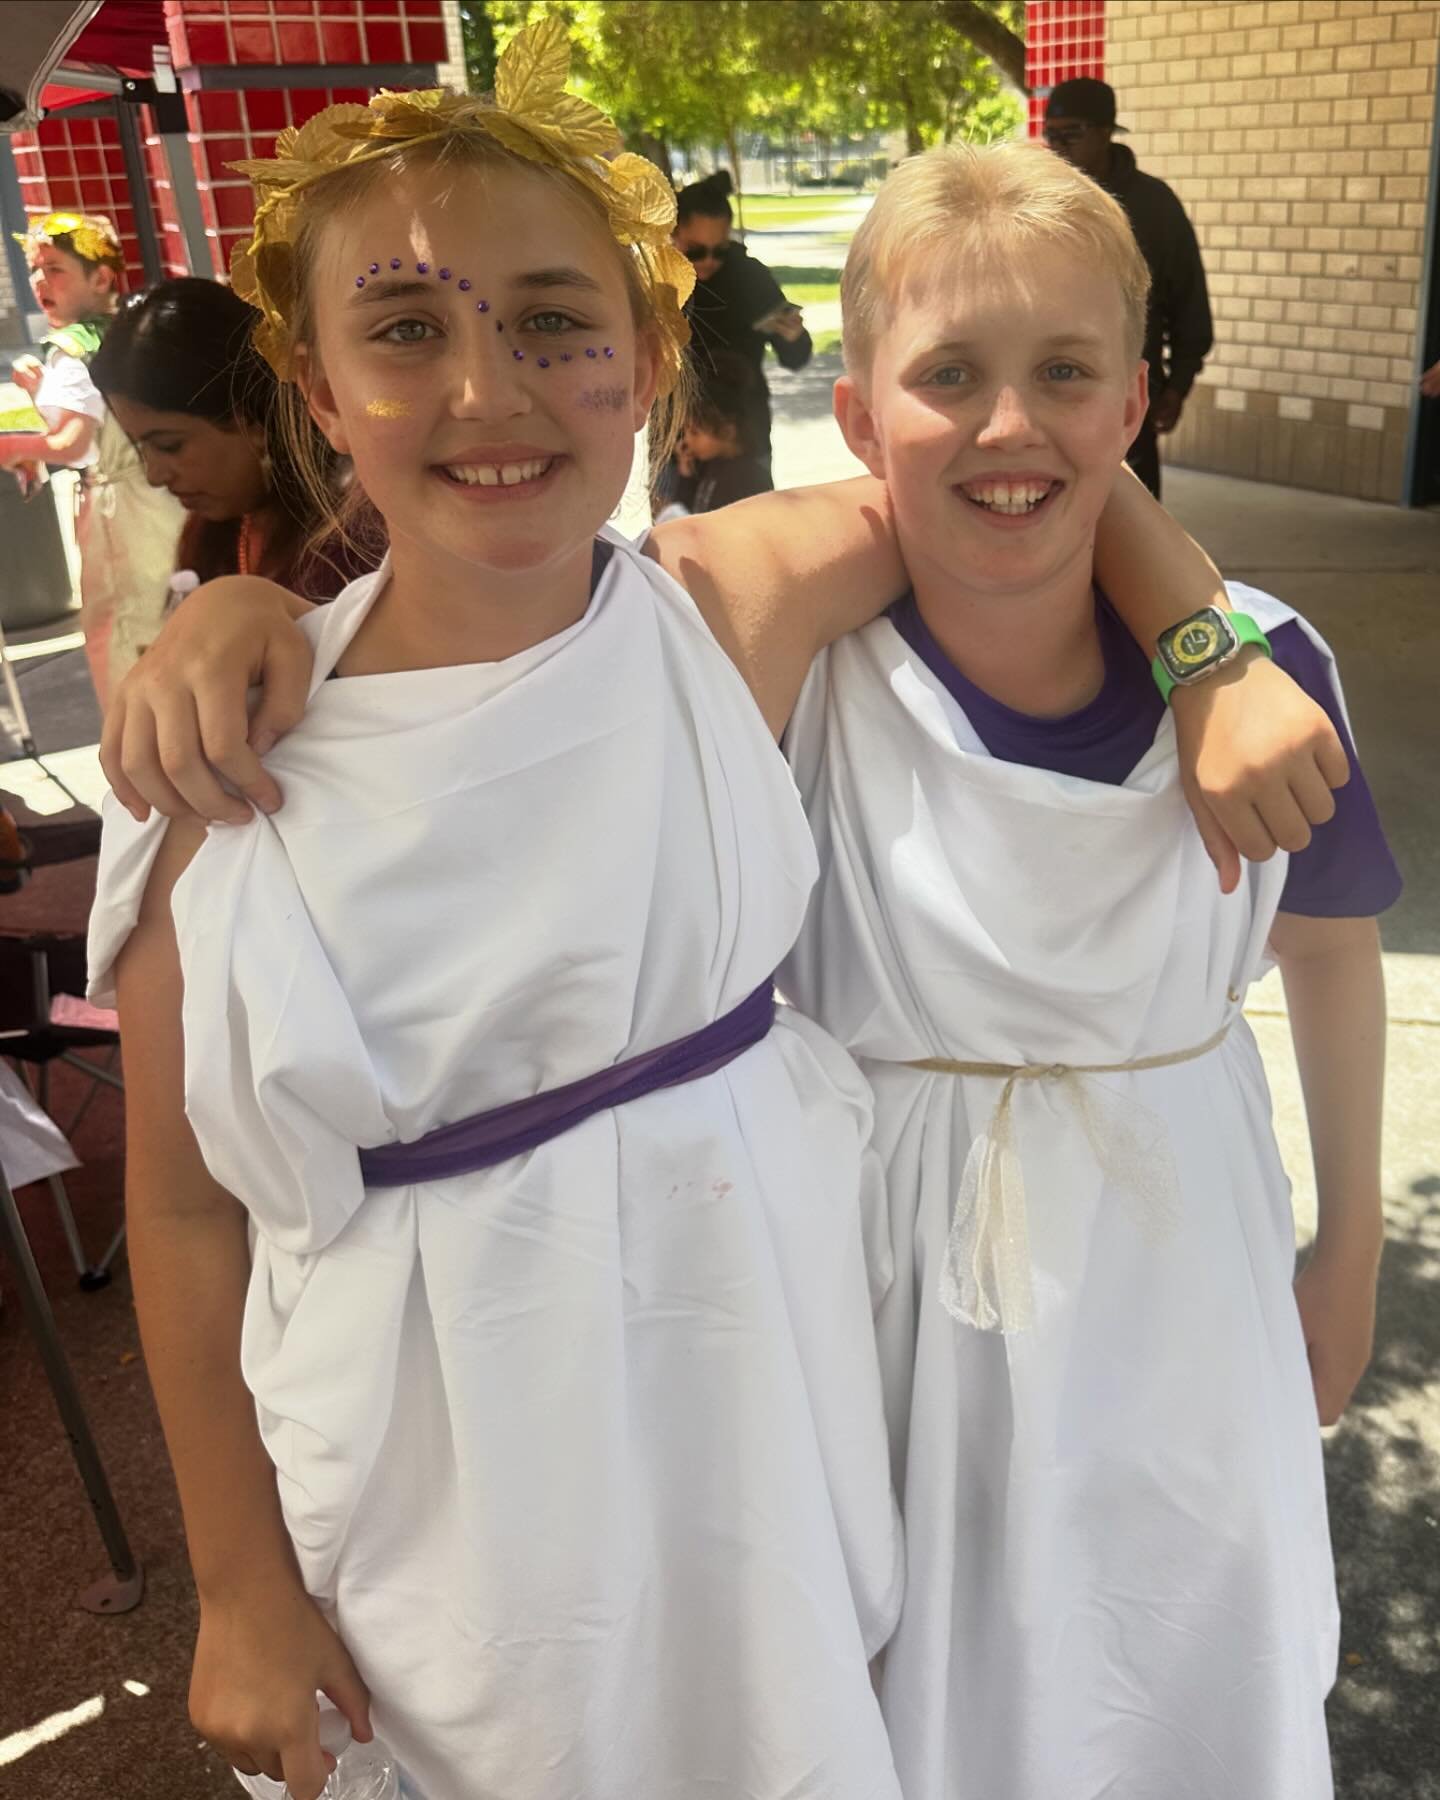 Such a fun day!! Greek day for all the 6th graders.  Love this tradition and that the kids got to enjoy it all! ⁣
 ⁣
#greekday #eaglessoar #6thgradetraditions #elementaryschool #relationships #relationshipgoals ⁣